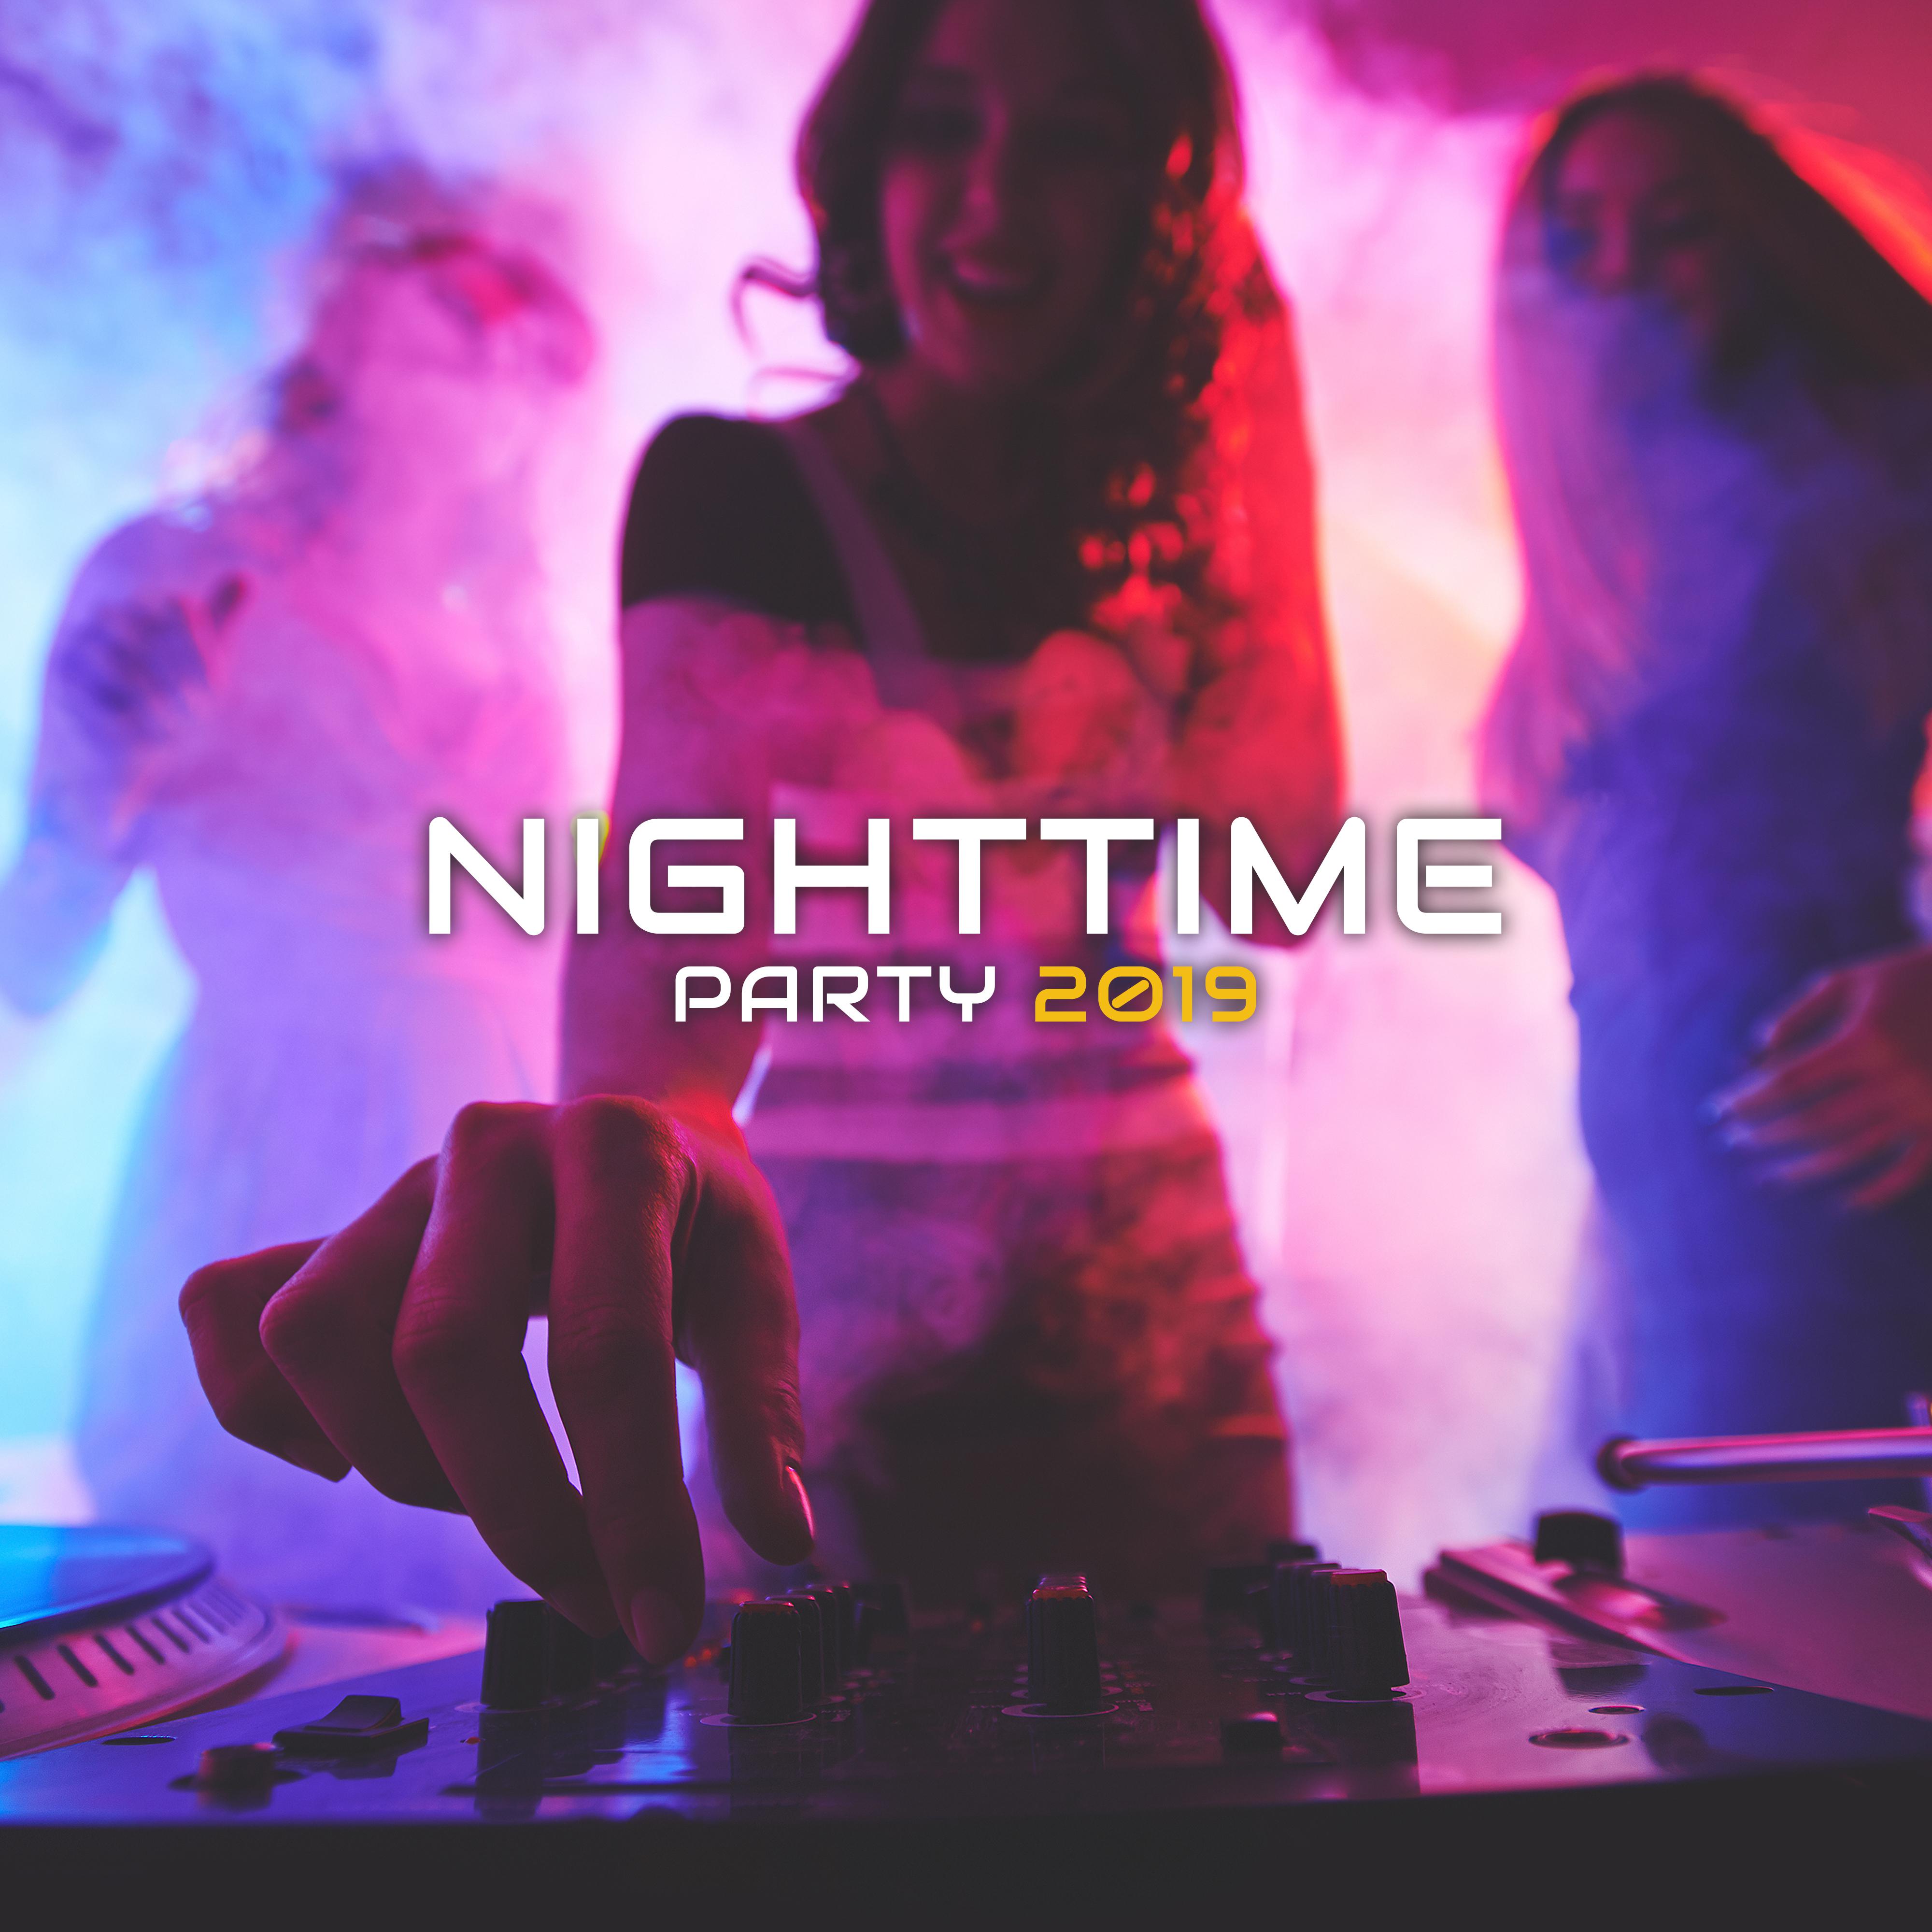 Nighttime Party 2019: 15 Best Songs for the Party and an All-night Party till Dawn